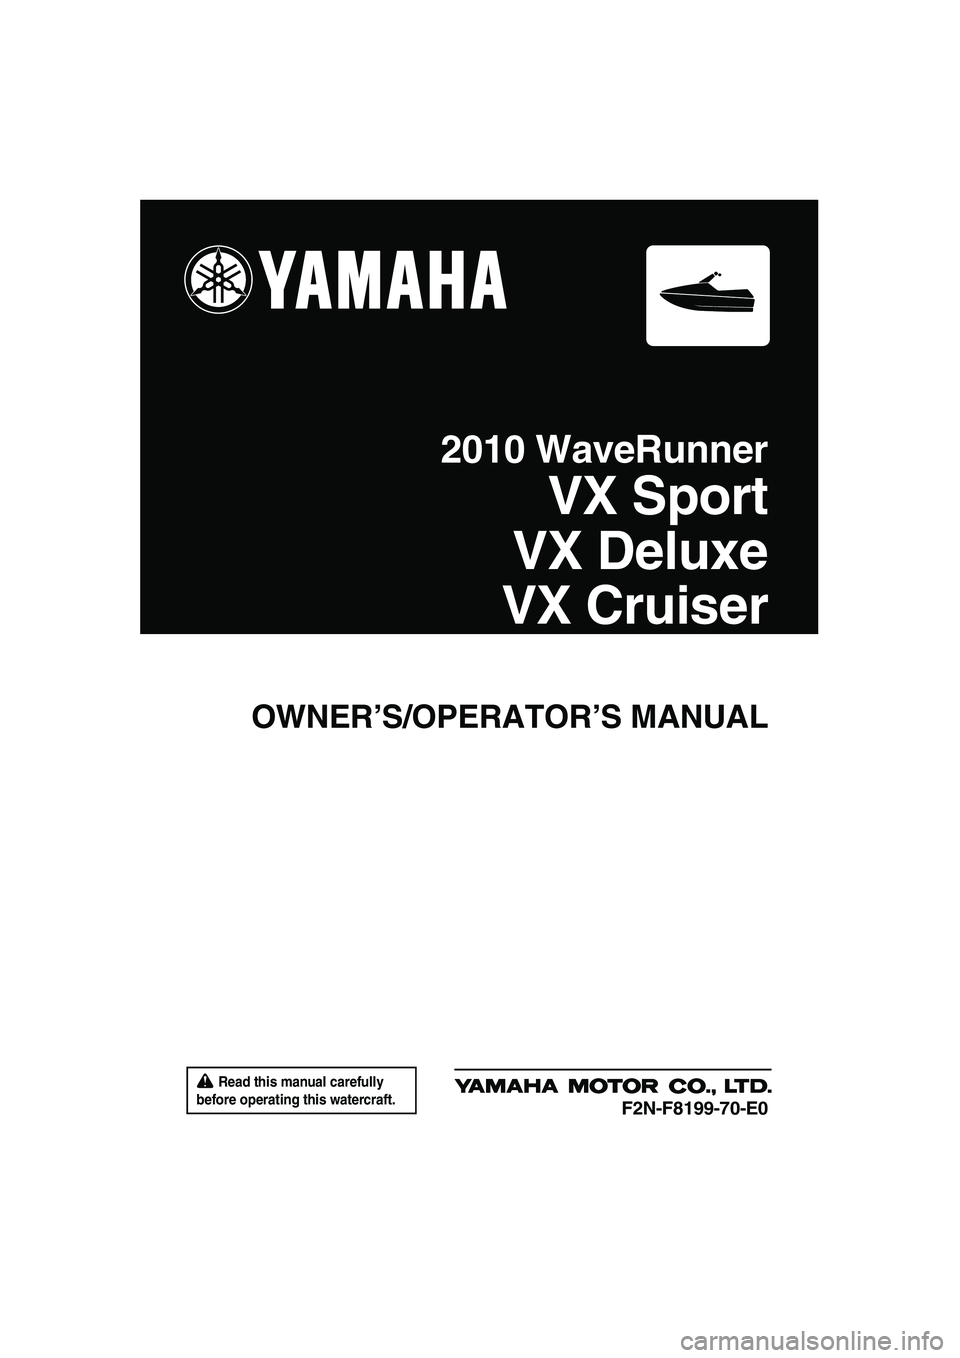 YAMAHA VX CRUISER 2010  Owners Manual  Read this manual carefully 
before operating this watercraft.
OWNER’S/OPERATOR’S MANUAL
2010 WaveRunner
VX Sport
VX Deluxe
VX Cruiser
F2N-F8199-70-E0
UF2N70E0.book  Page 1  Tuesday, October 6, 20